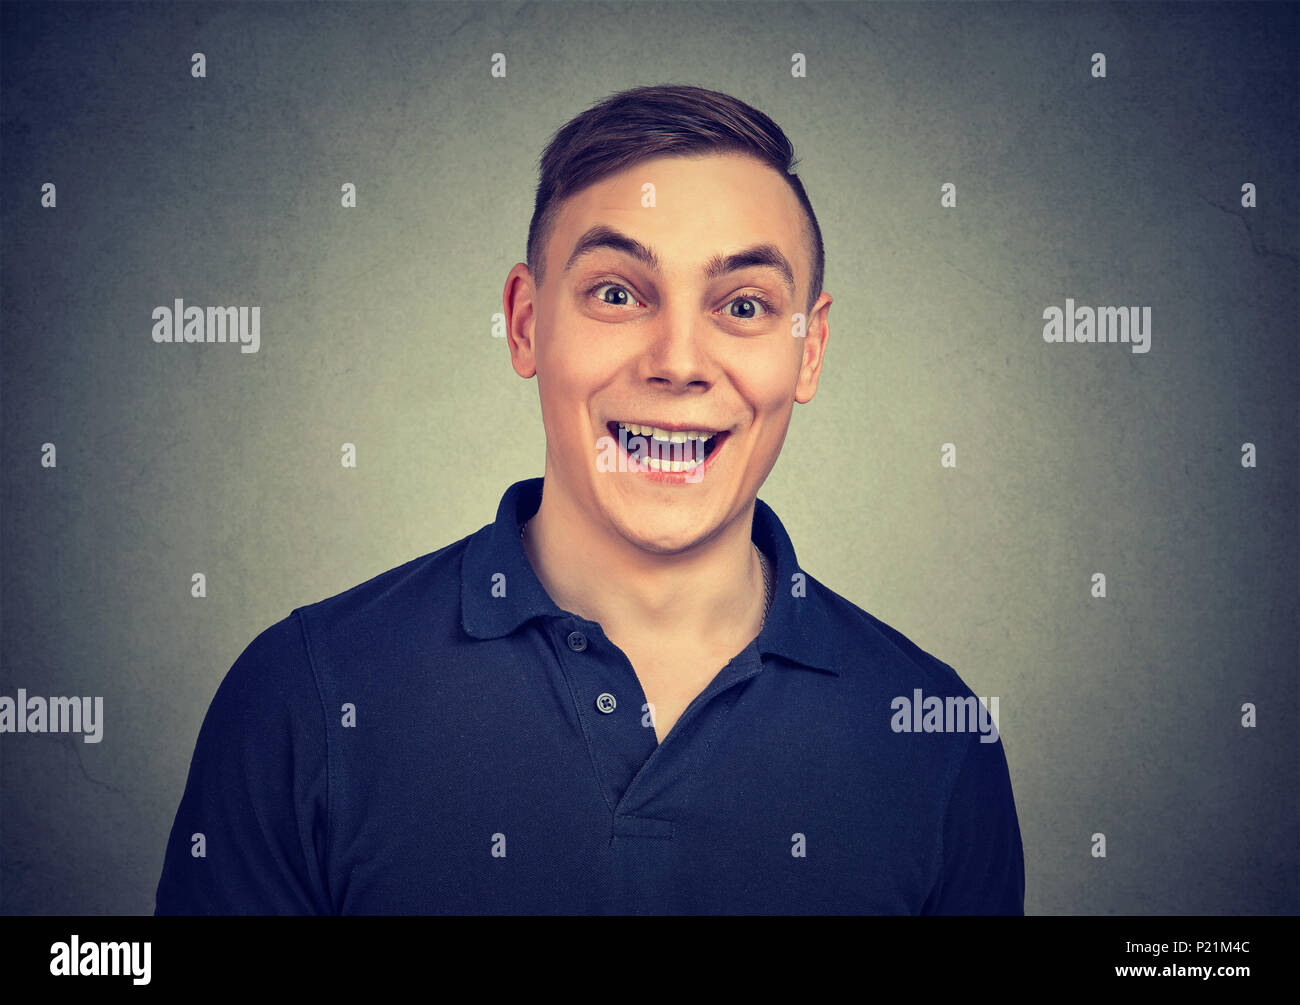 Surprised man looking at camera isolated on gray background Stock Photo